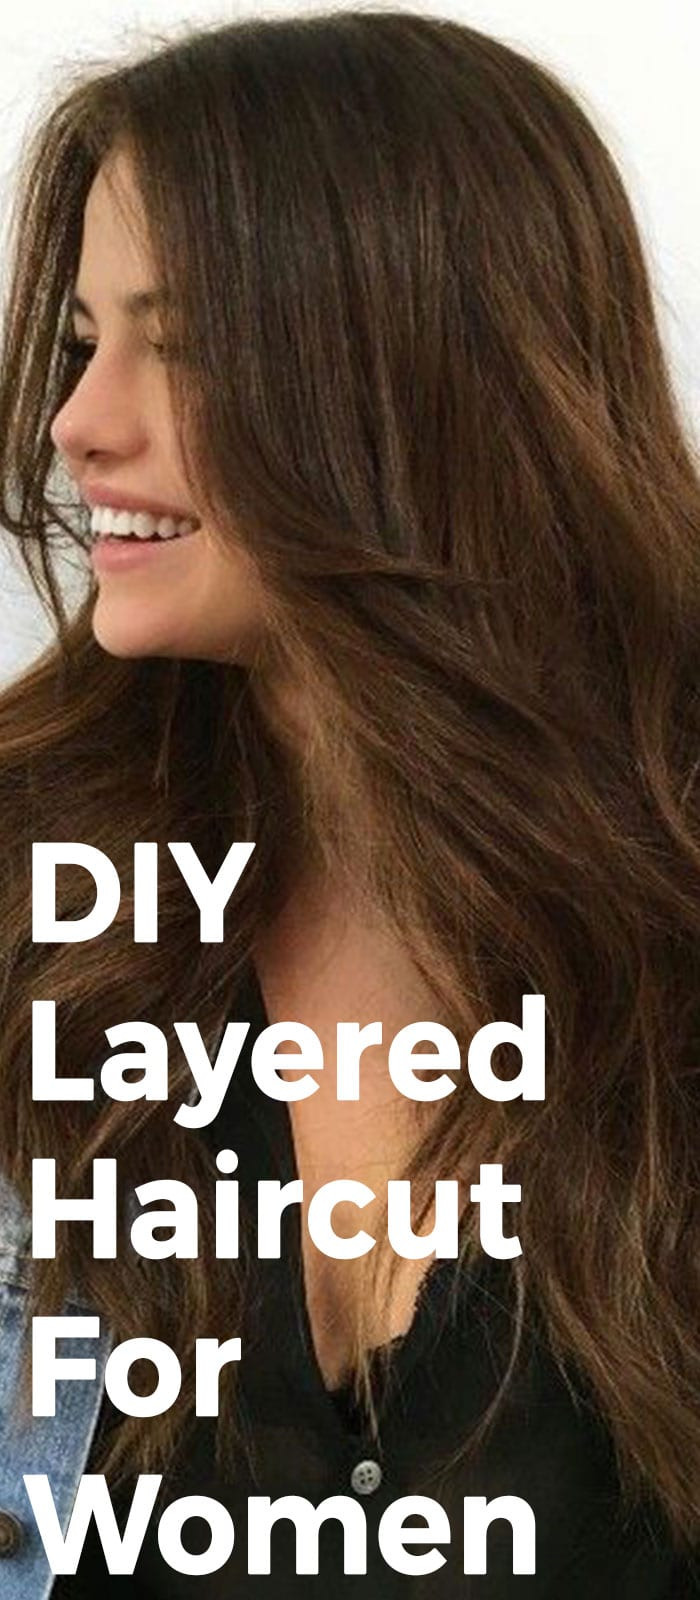 DIY Haircut For Women
 5 Ways You Can Style Your Layered Hairstyle The Right Way